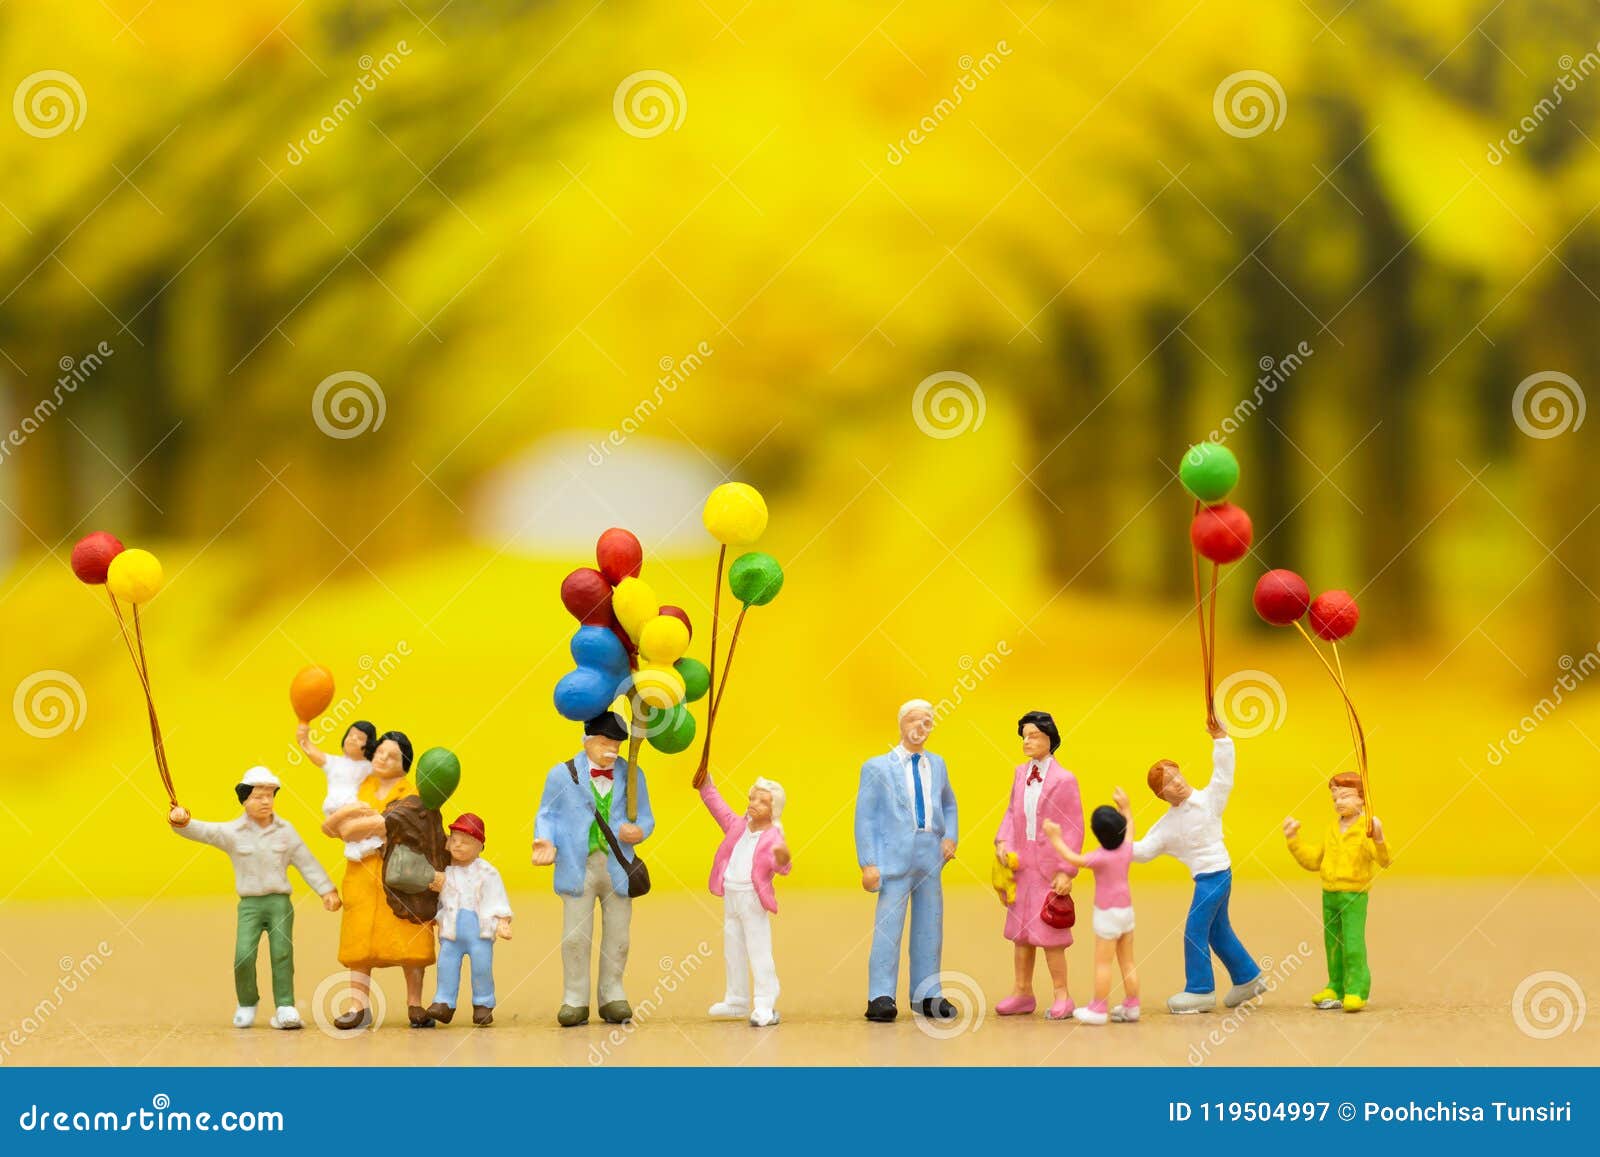 Miniature Family: Childrens Playing Balloon Together. Image Use for  Background International Day of Families Concept Stock Image - Image of  grass, freedom: 119504997